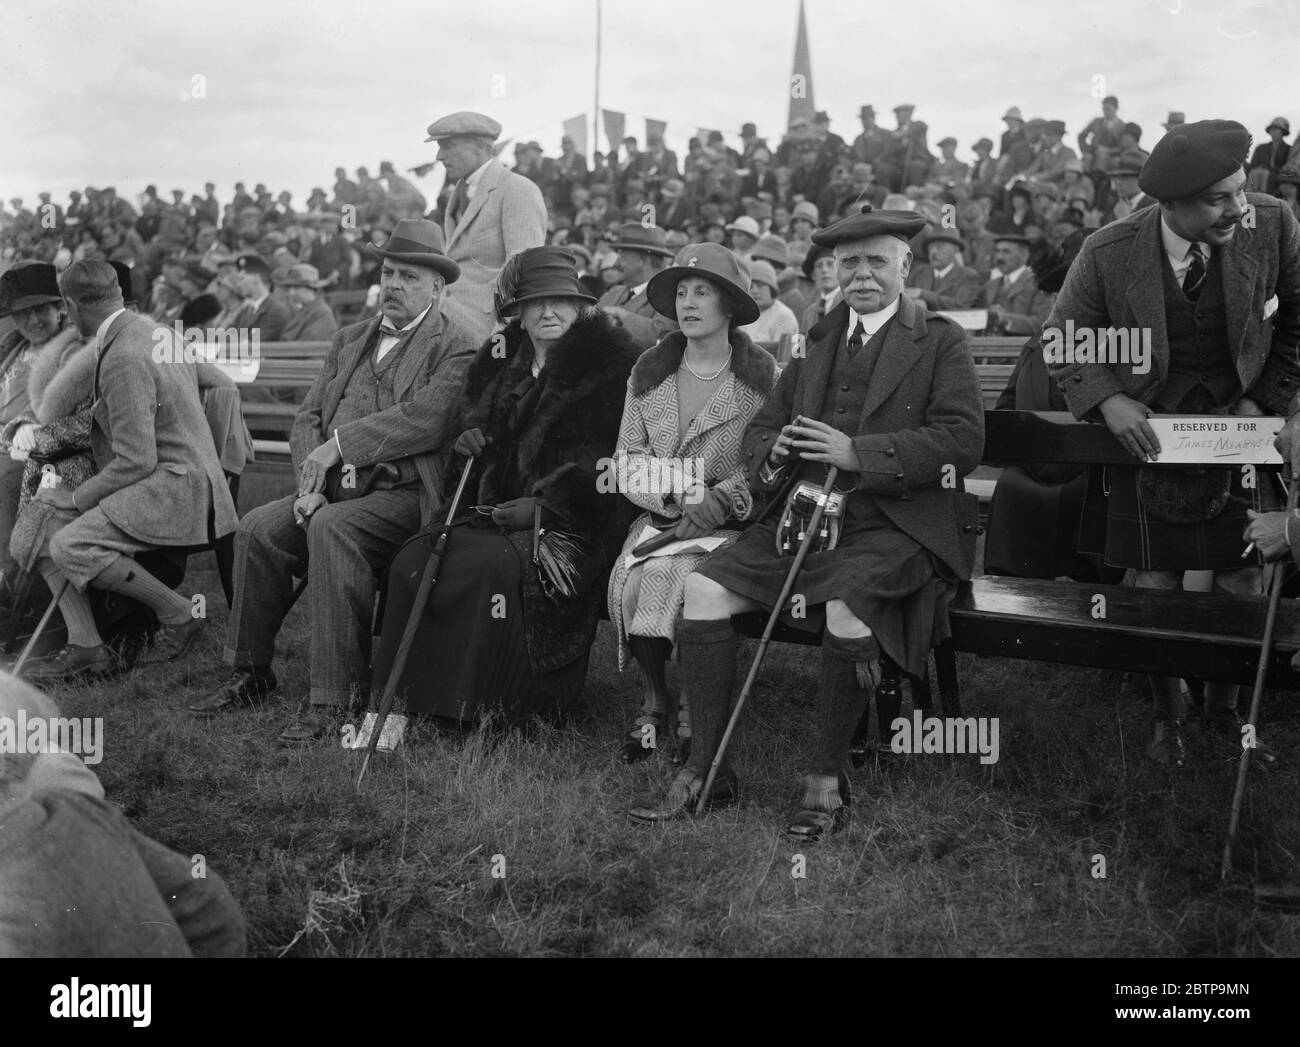 Aboyne highland games . Left to right : Lord Swaythling , Lady Shaw , Lady Swaythling , and Lord Shaw . 9 September 1926 Stock Photo